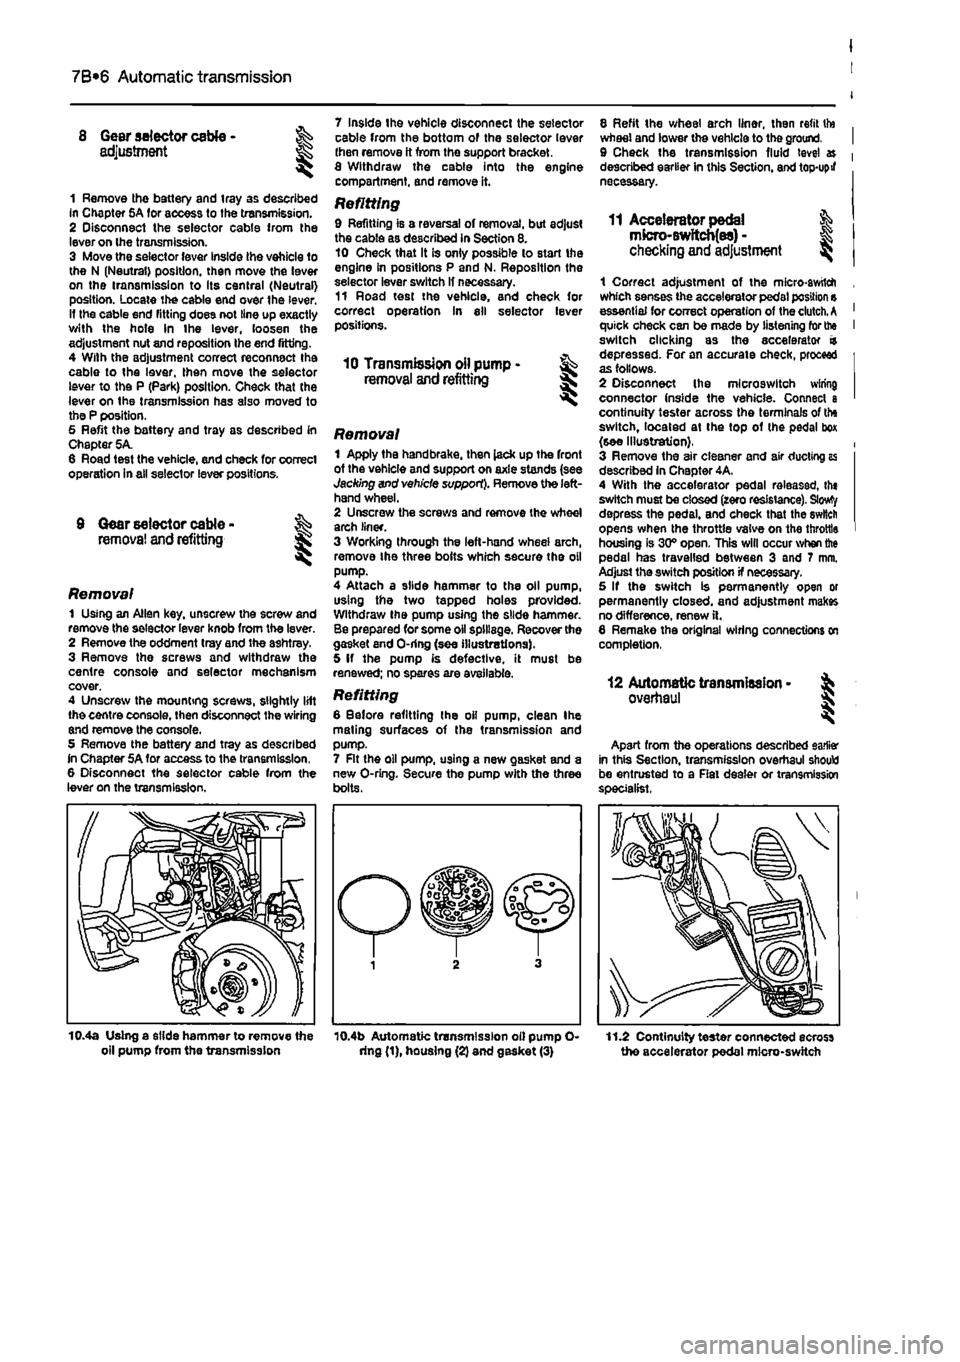 FIAT PUNTO 1995 176 / 1.G Workshop Manual 
7B*6 Automatic transmission 
Gear selector cable -adjustment 
1 Remove the battery and tray as described In Chapter 5A for access to the transmission. 2 Disconnect the selector cable from the lever o